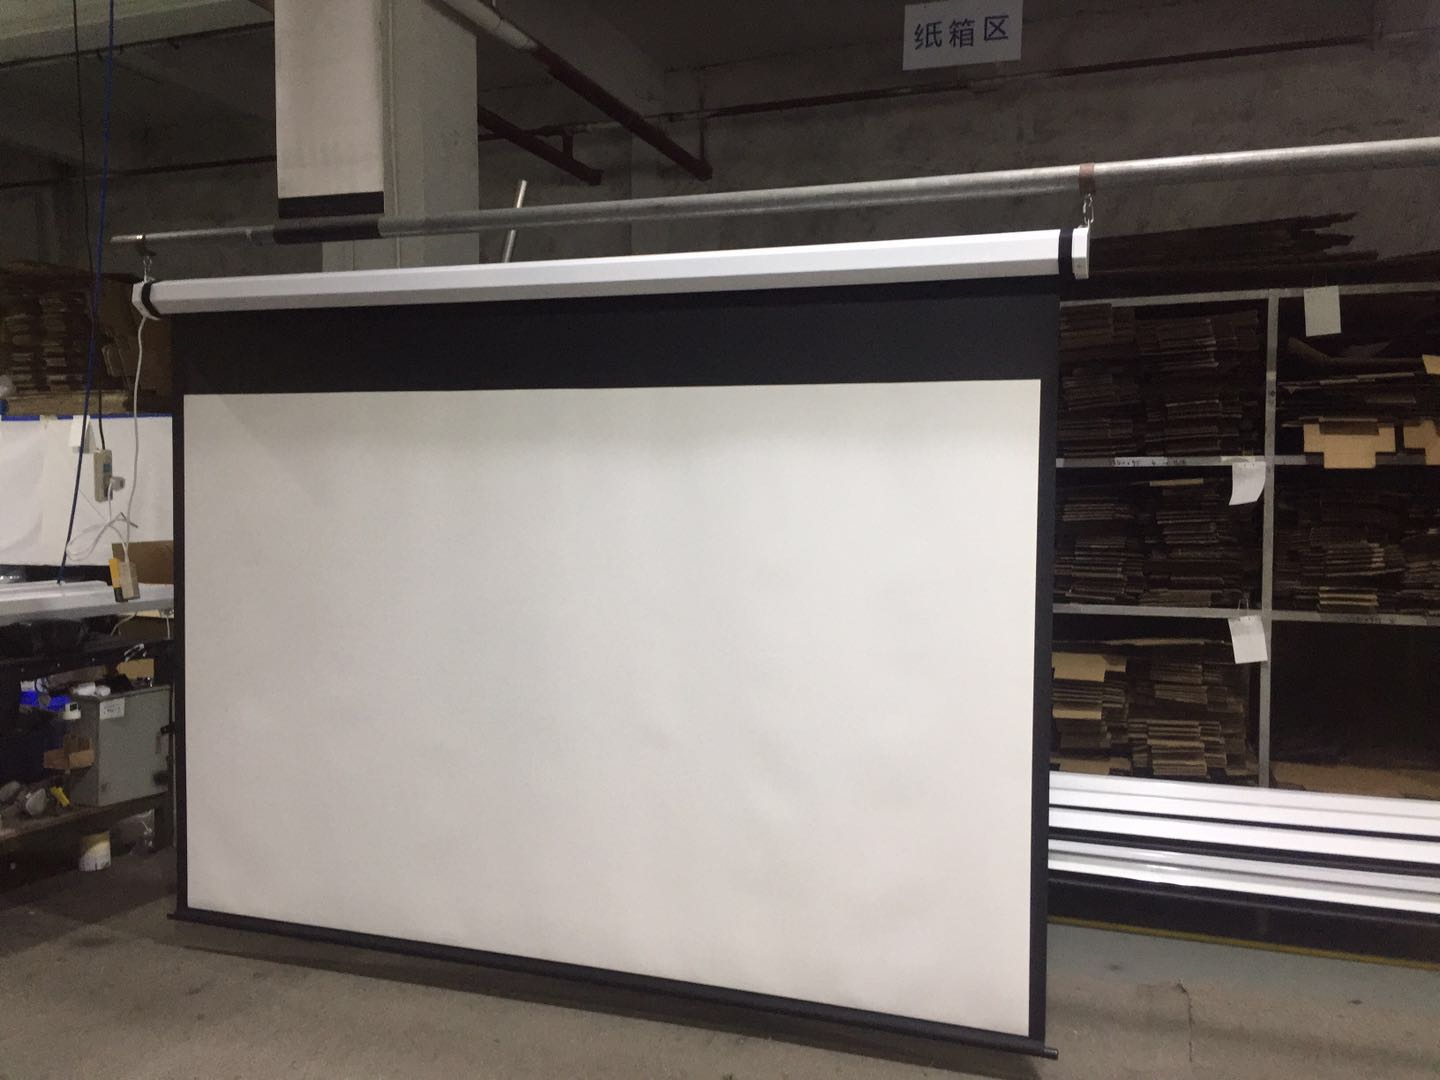 Best Motorized projection screen 2019 with competitive price